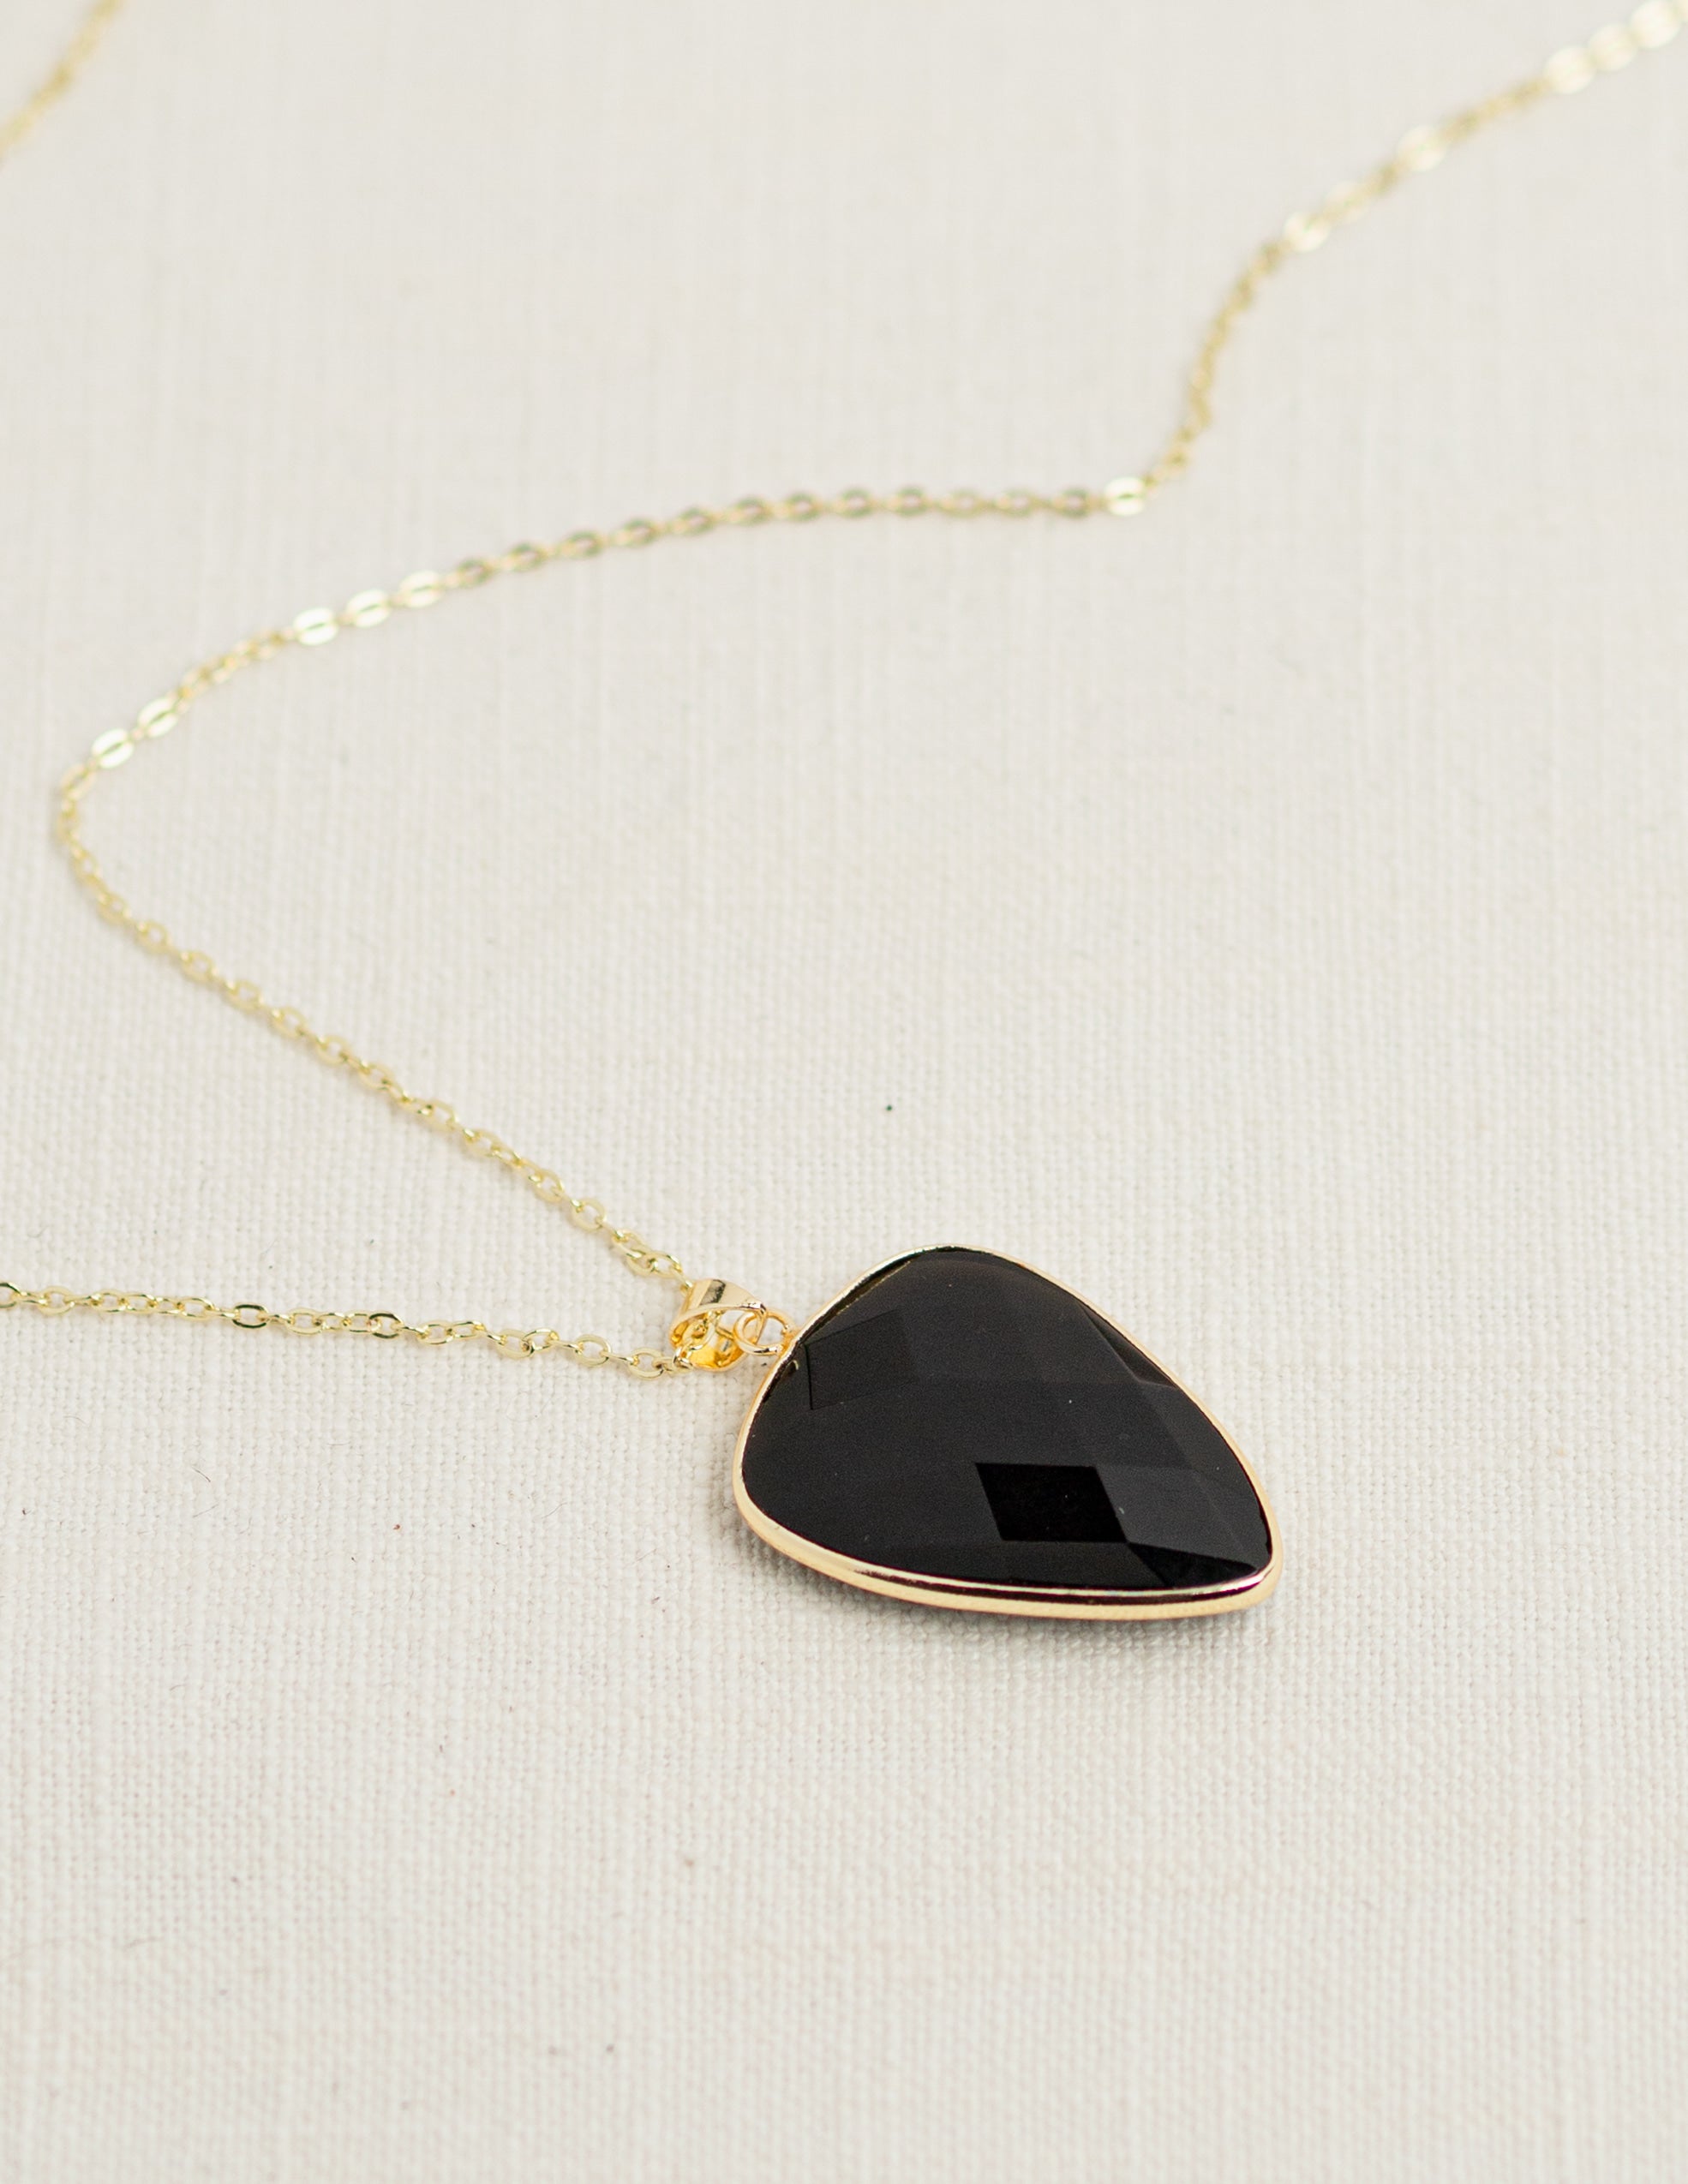 Black Agate Faceted Long Gemstone Diffuser Necklace - Put on Love Designs